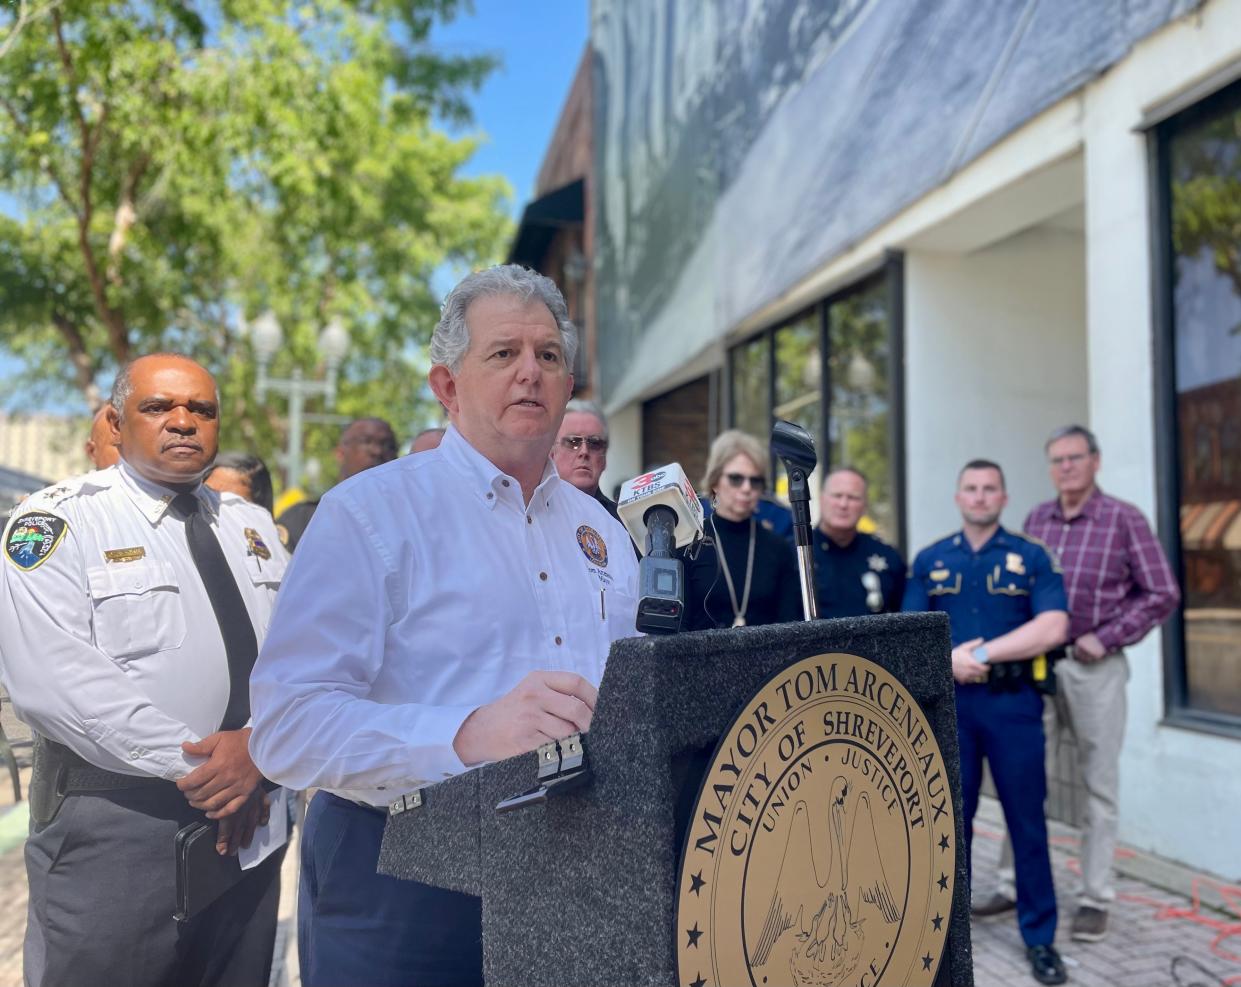 Shreveport Mayor Tom Arceneaux speaks at a press conference following a violent night in Shreveport on March 25, 2023.